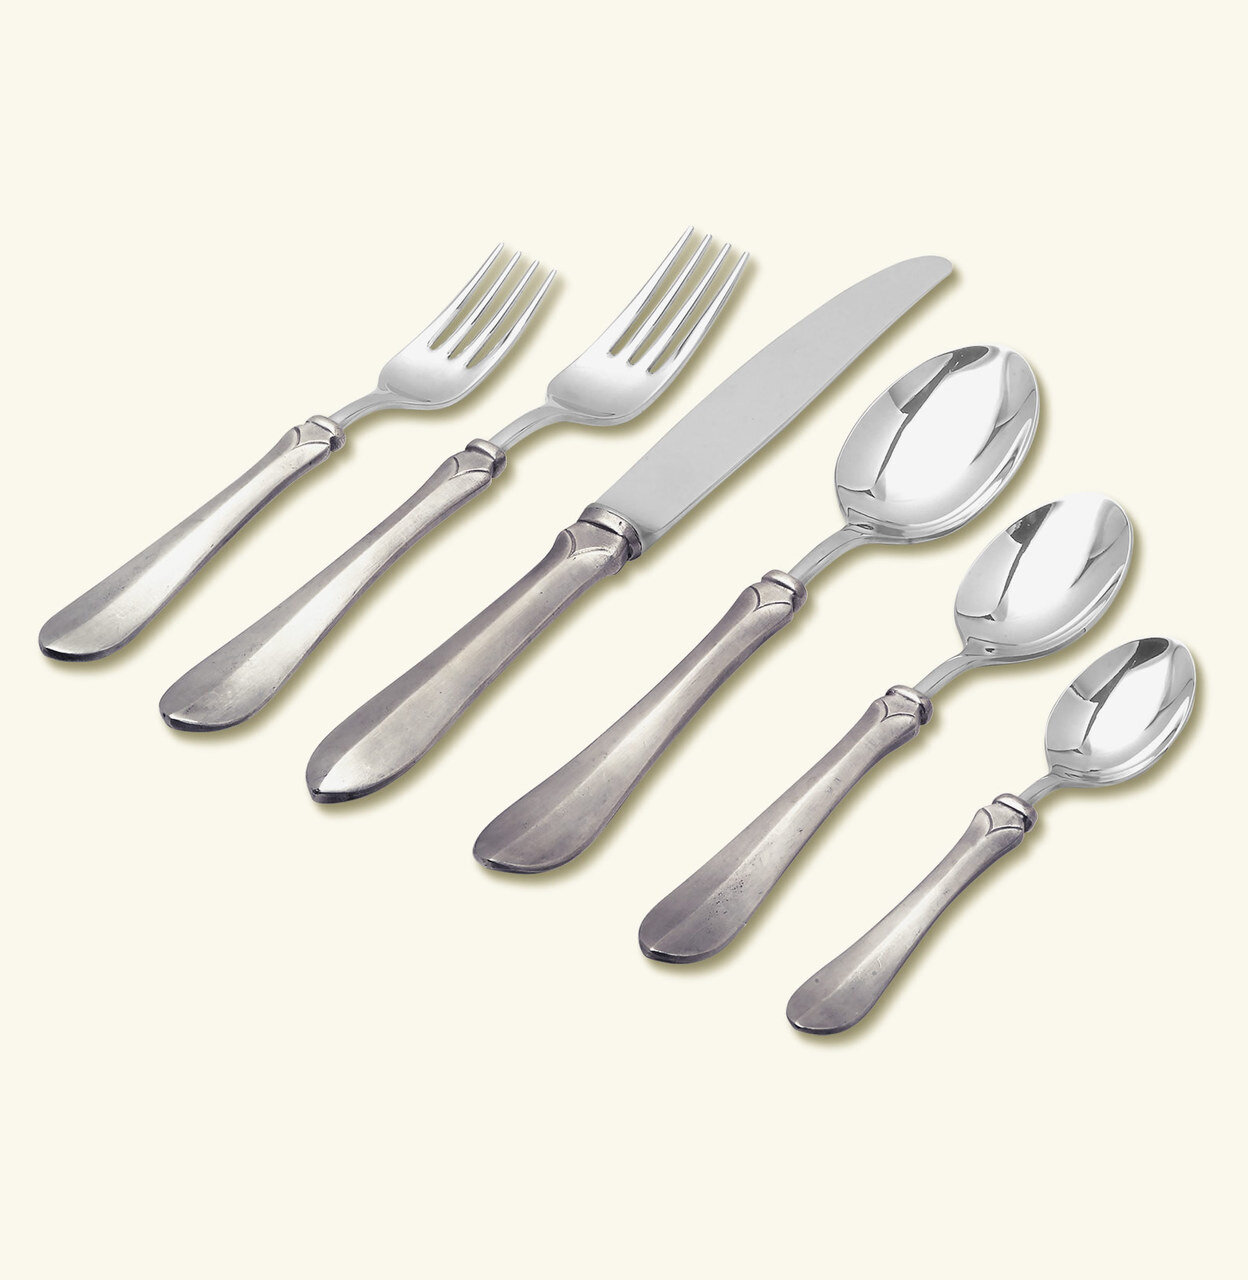 Match Pewter Sofia 6 Piece Place Setting